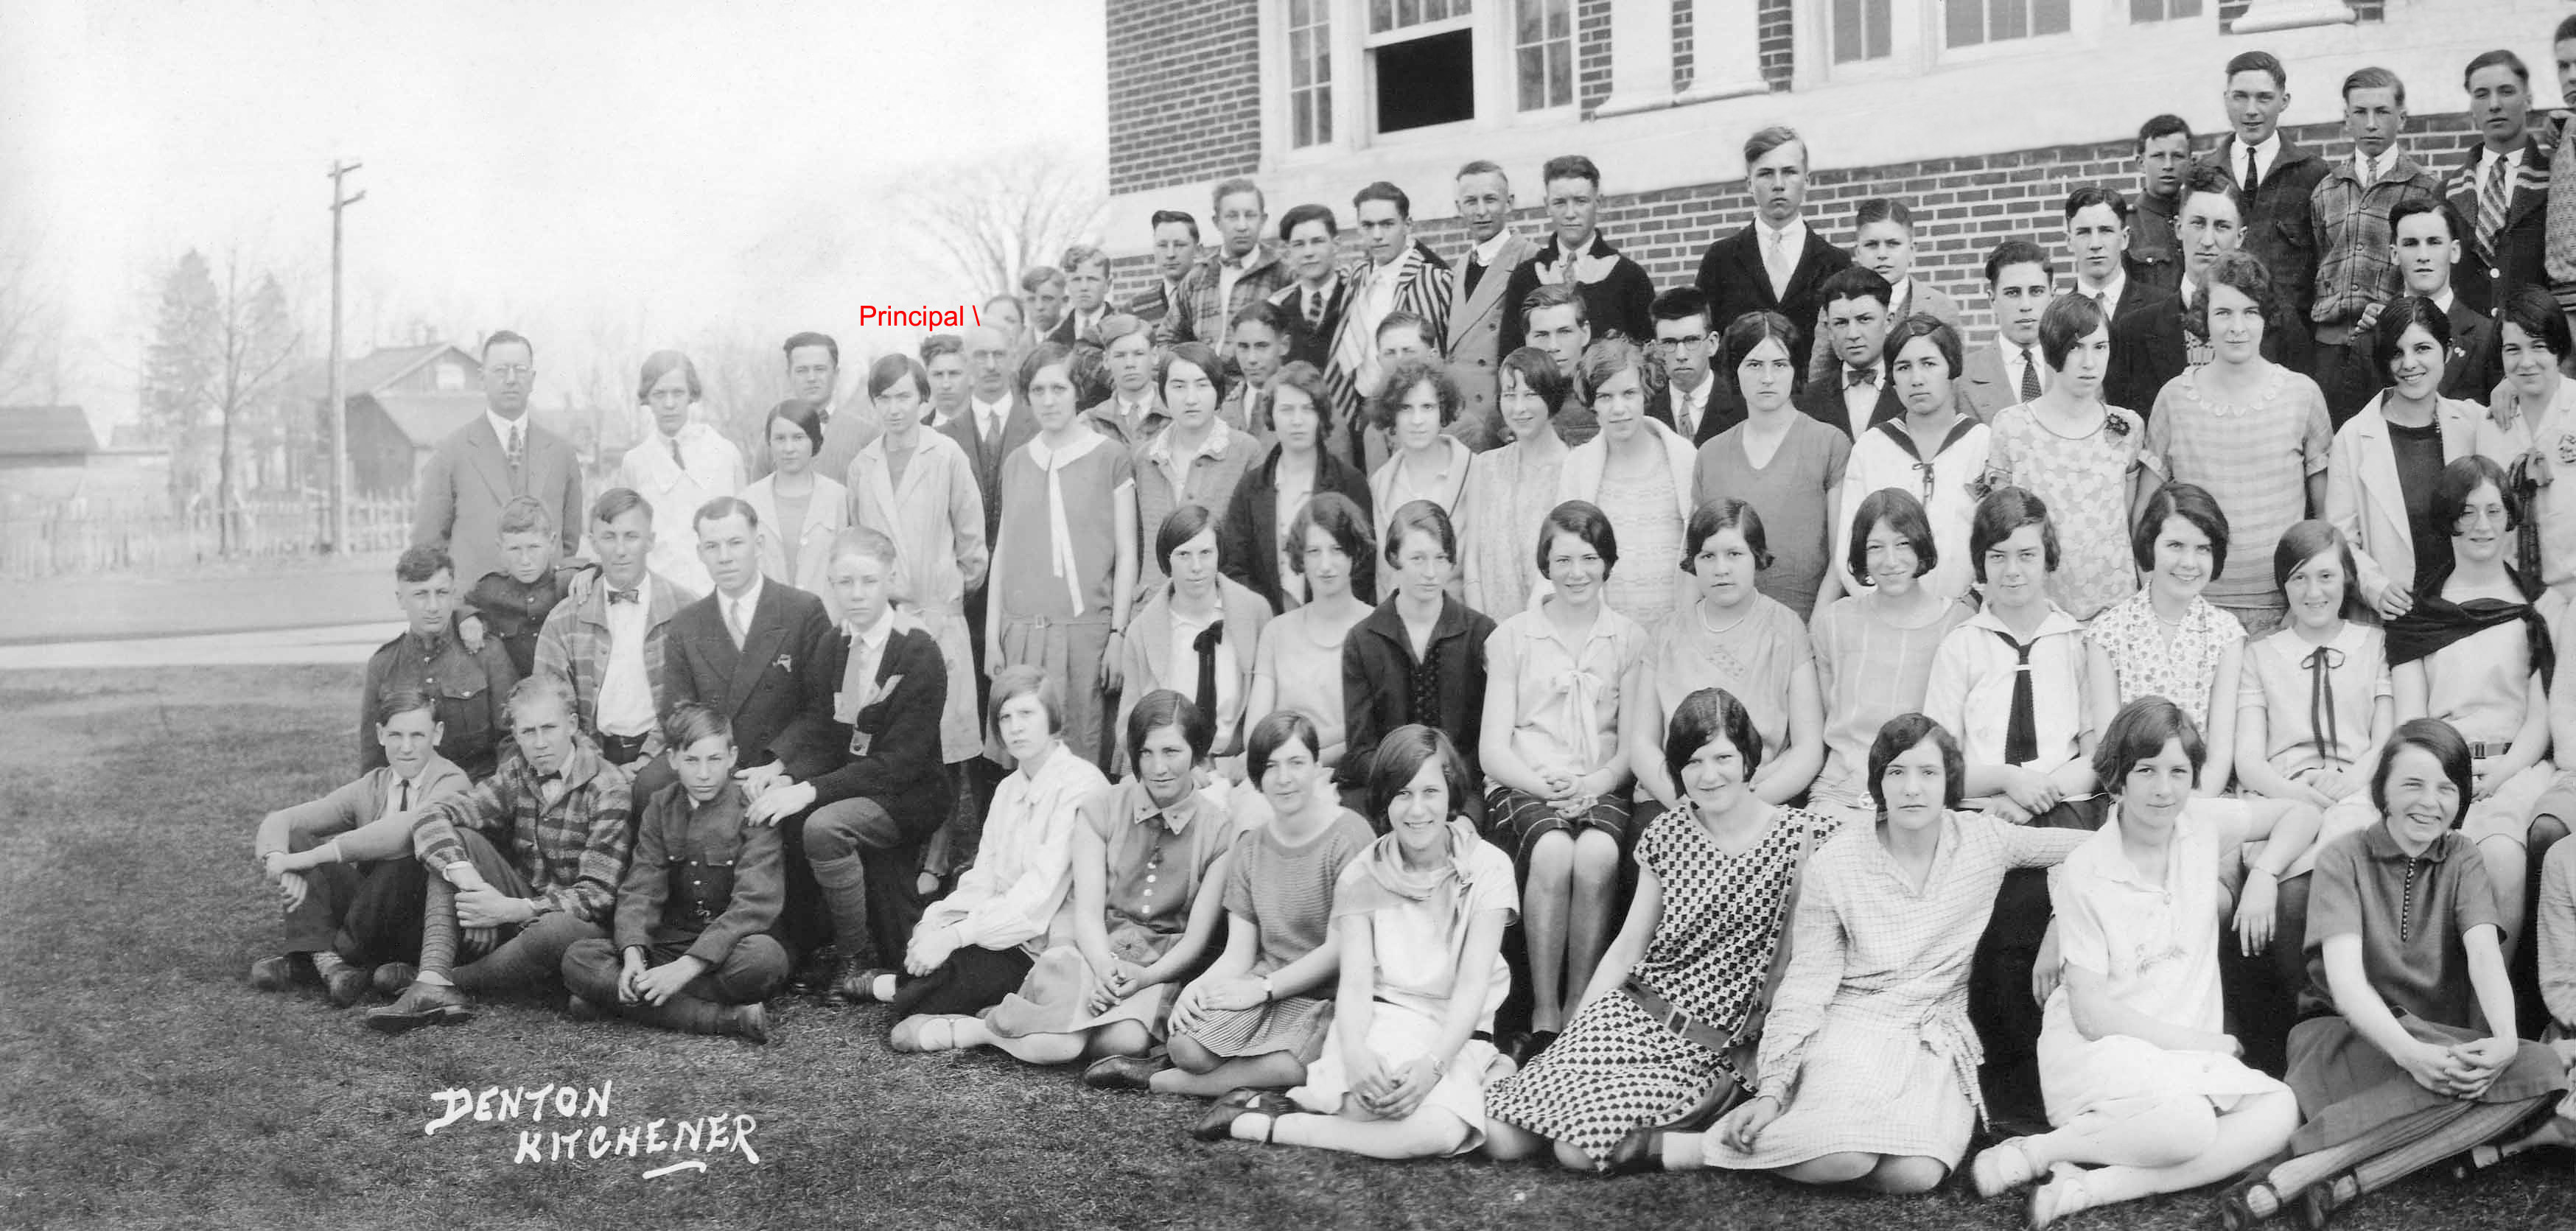 (Click to magnify (multiple levels of magnification)) ... warning very large file size. There is some debate as to the actual date when this was taken, but the final third of the photo shows May 28; I assume this means May 1928. There is no one alive now 